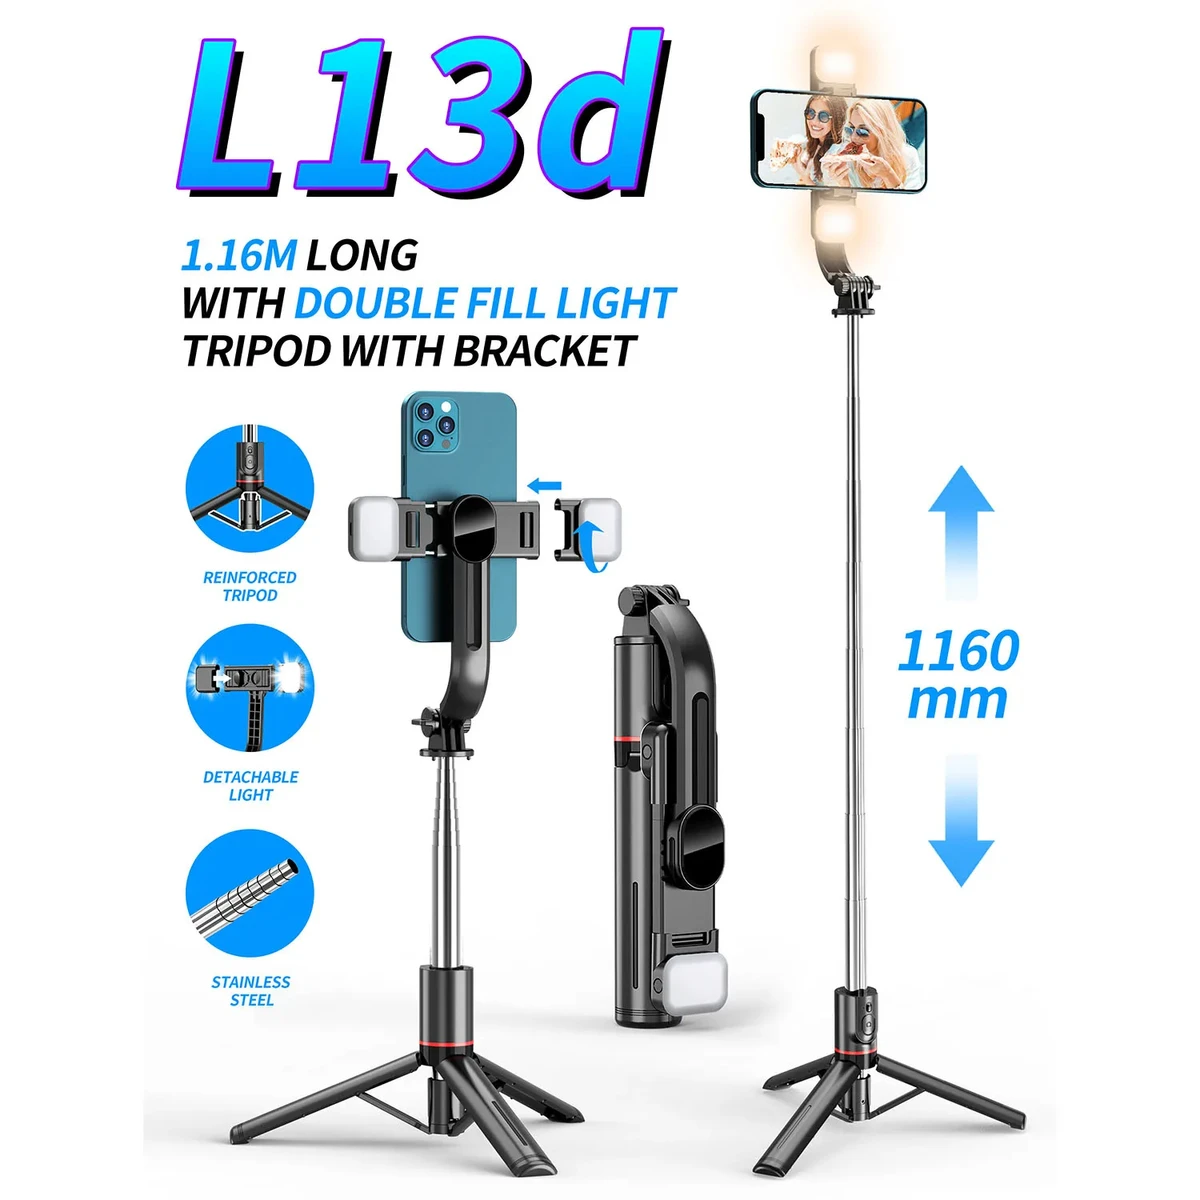 L13d Bluetooth Tripod Selfie Stick with Front and Rear Fill Light